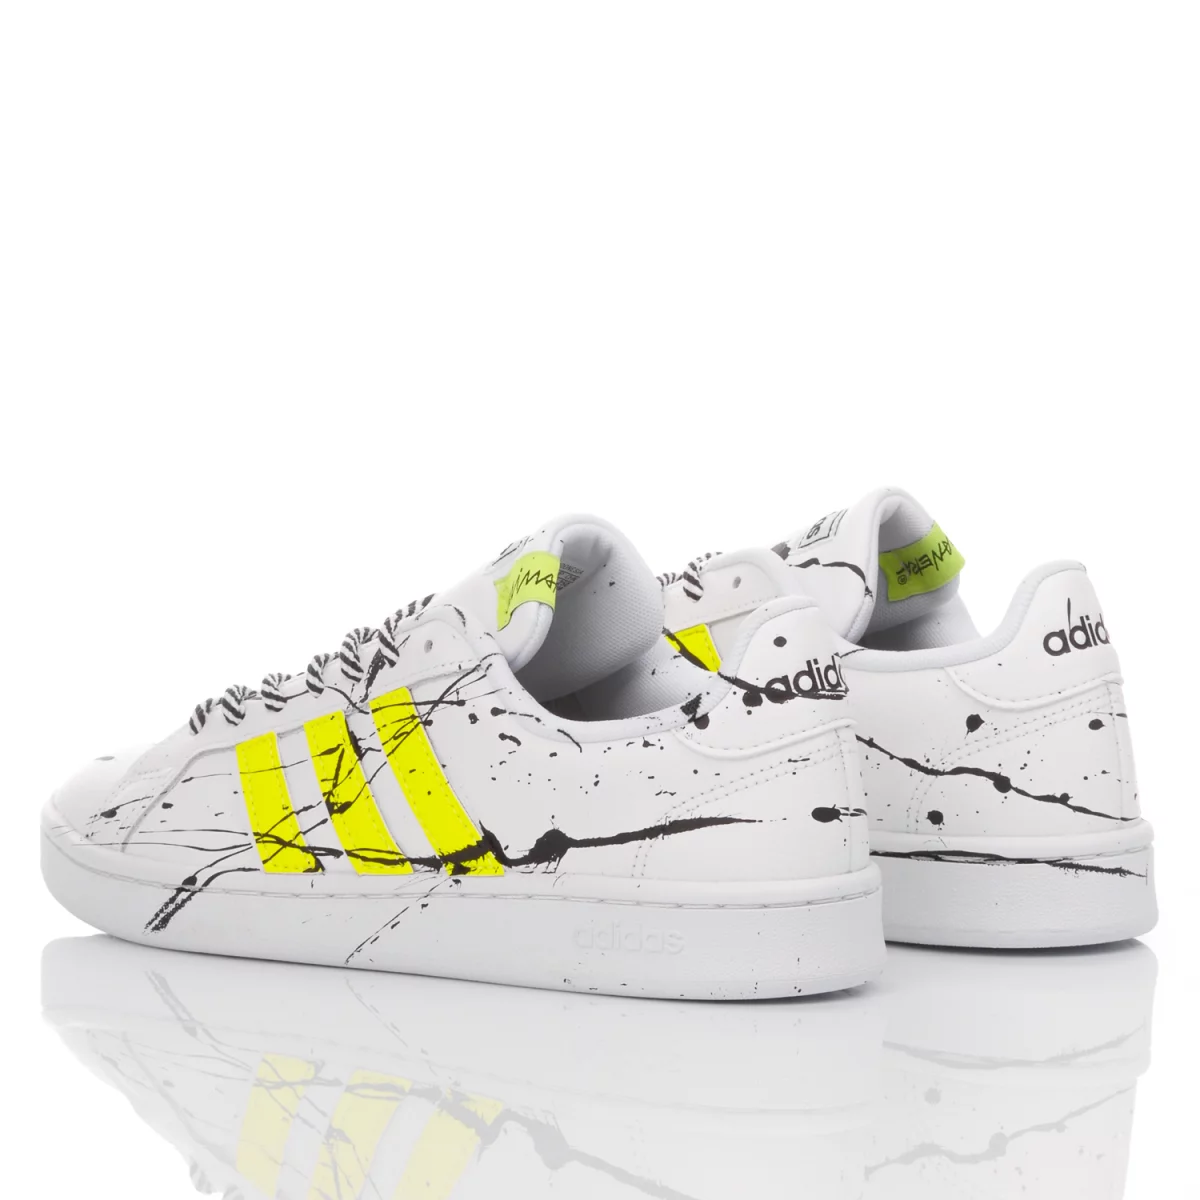 Adidas Stan Smith Runners in White/Yellow Neon — UFO No More